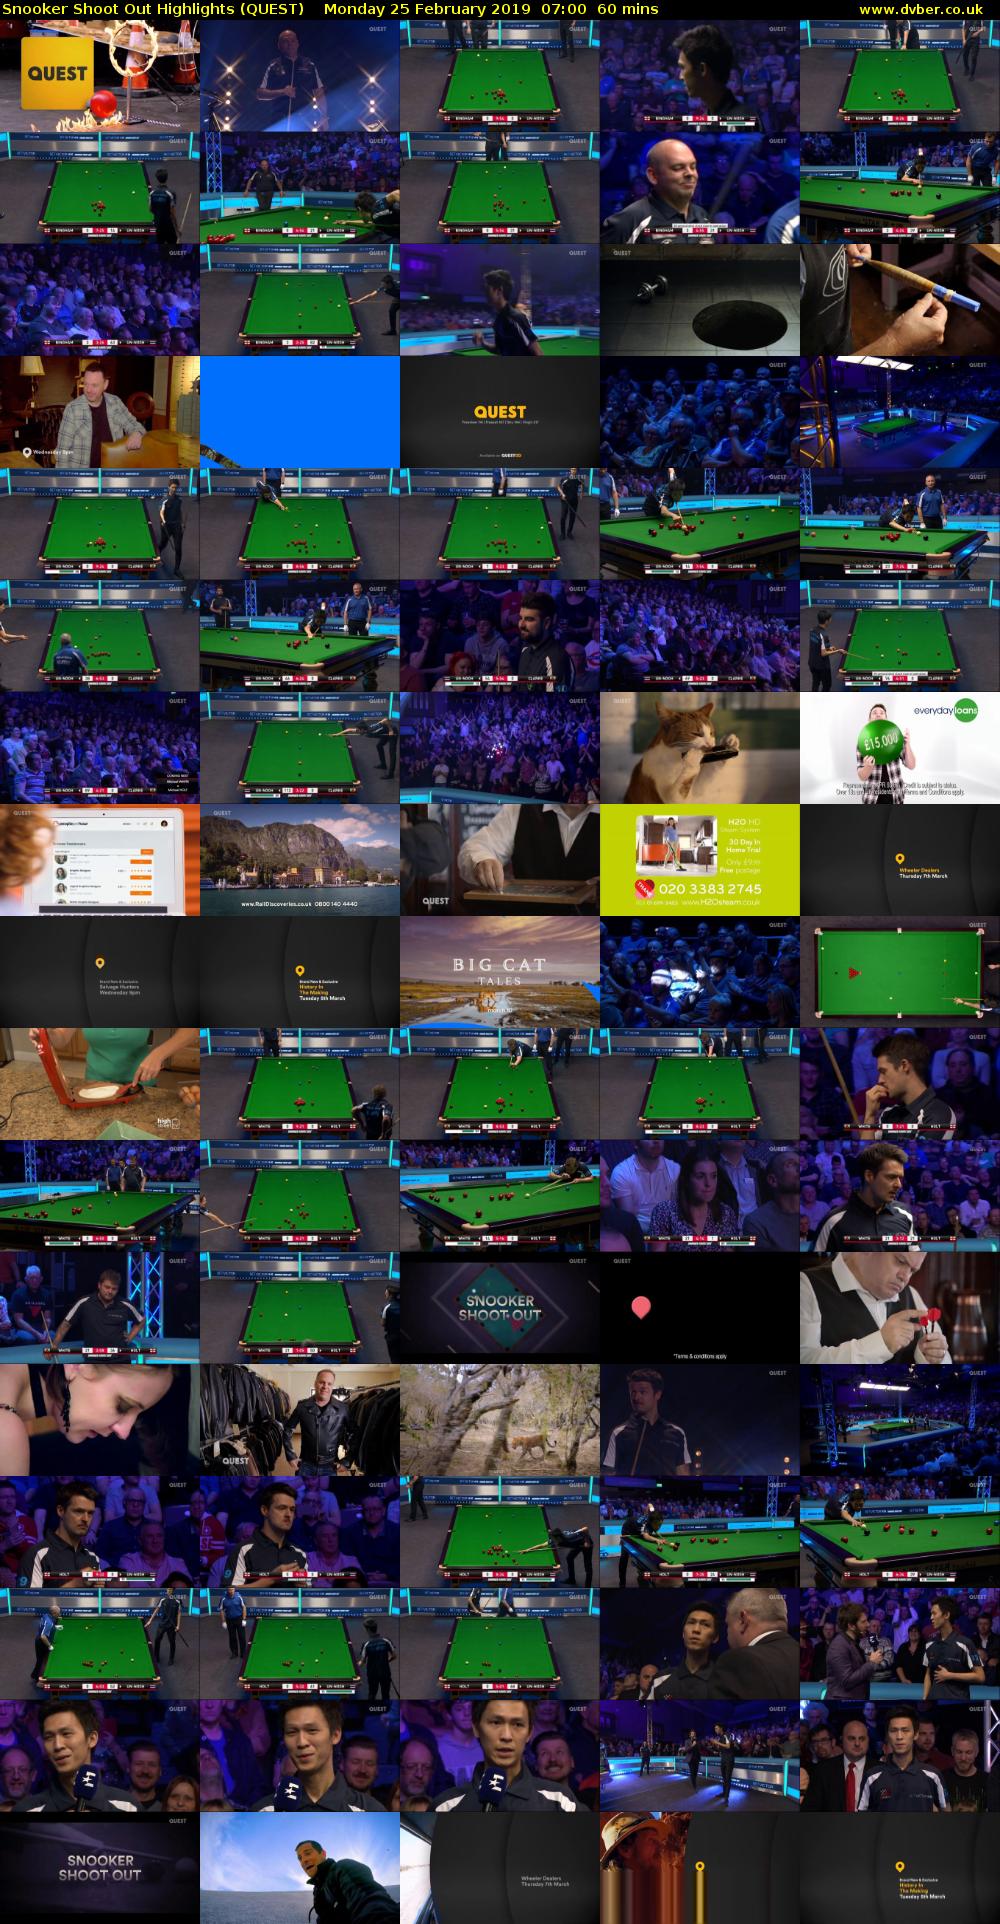 Snooker Shoot Out Highlights (QUEST) Monday 25 February 2019 07:00 - 08:00